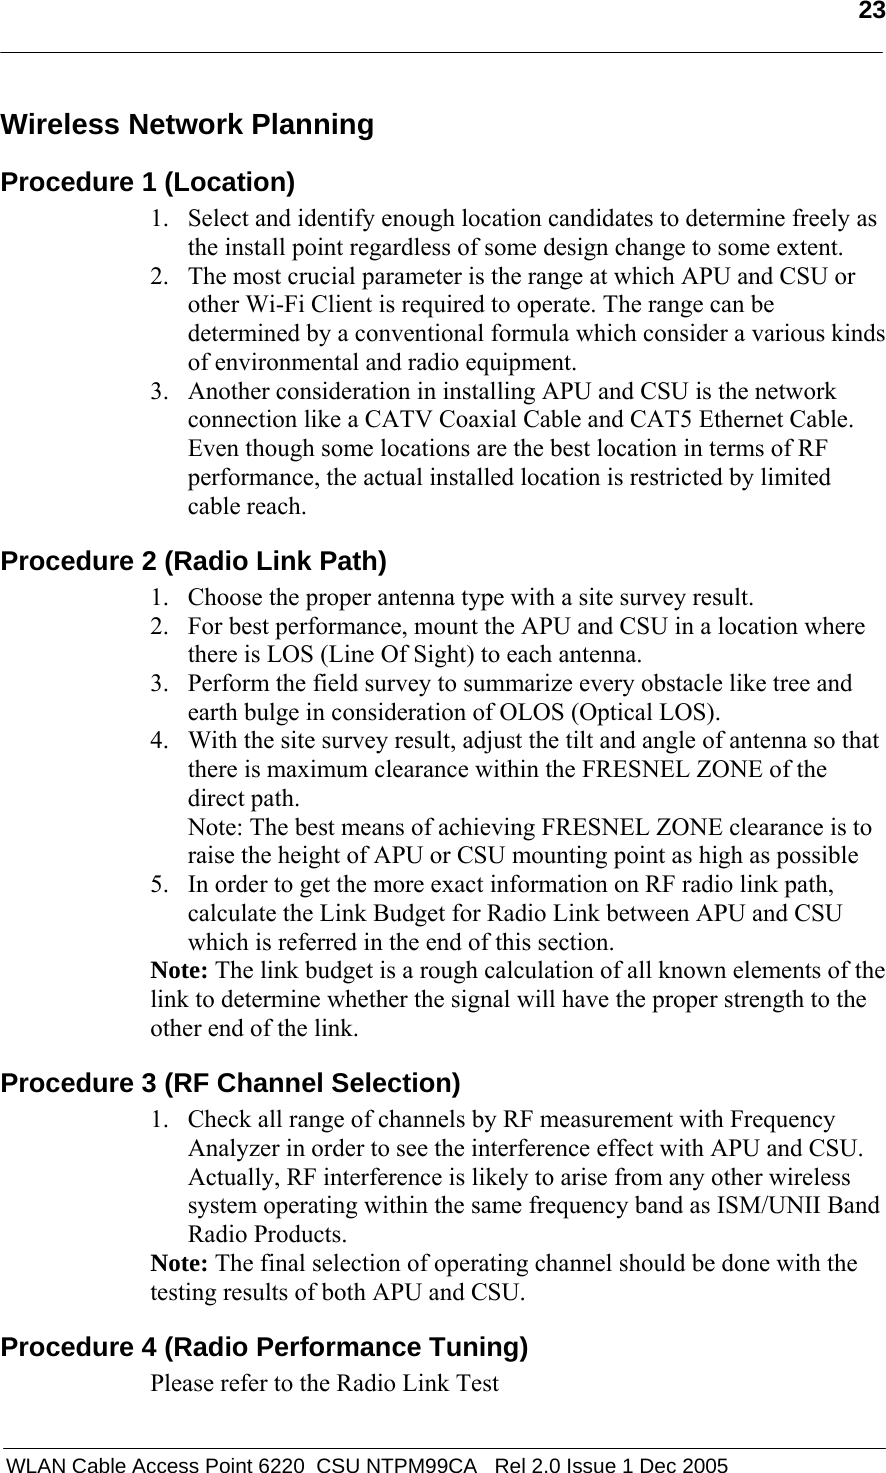   23   WLAN Cable Access Point 6220  CSU NTPM99CA   Rel 2.0 Issue 1 Dec 2005 Wireless Network Planning  Procedure 1 (Location) 1. Select and identify enough location candidates to determine freely as the install point regardless of some design change to some extent. 2. The most crucial parameter is the range at which APU and CSU or other Wi-Fi Client is required to operate. The range can be determined by a conventional formula which consider a various kinds of environmental and radio equipment. 3. Another consideration in installing APU and CSU is the network connection like a CATV Coaxial Cable and CAT5 Ethernet Cable.  Even though some locations are the best location in terms of RF performance, the actual installed location is restricted by limited cable reach. Procedure 2 (Radio Link Path) 1. Choose the proper antenna type with a site survey result. 2. For best performance, mount the APU and CSU in a location where there is LOS (Line Of Sight) to each antenna.  3. Perform the field survey to summarize every obstacle like tree and earth bulge in consideration of OLOS (Optical LOS).  4. With the site survey result, adjust the tilt and angle of antenna so that there is maximum clearance within the FRESNEL ZONE of the direct path.  Note: The best means of achieving FRESNEL ZONE clearance is to raise the height of APU or CSU mounting point as high as possible 5. In order to get the more exact information on RF radio link path, calculate the Link Budget for Radio Link between APU and CSU which is referred in the end of this section. Note: The link budget is a rough calculation of all known elements of the link to determine whether the signal will have the proper strength to the other end of the link.  Procedure 3 (RF Channel Selection) 1. Check all range of channels by RF measurement with Frequency Analyzer in order to see the interference effect with APU and CSU. Actually, RF interference is likely to arise from any other wireless system operating within the same frequency band as ISM/UNII Band Radio Products.  Note: The final selection of operating channel should be done with the testing results of both APU and CSU. Procedure 4 (Radio Performance Tuning) Please refer to the Radio Link Test 